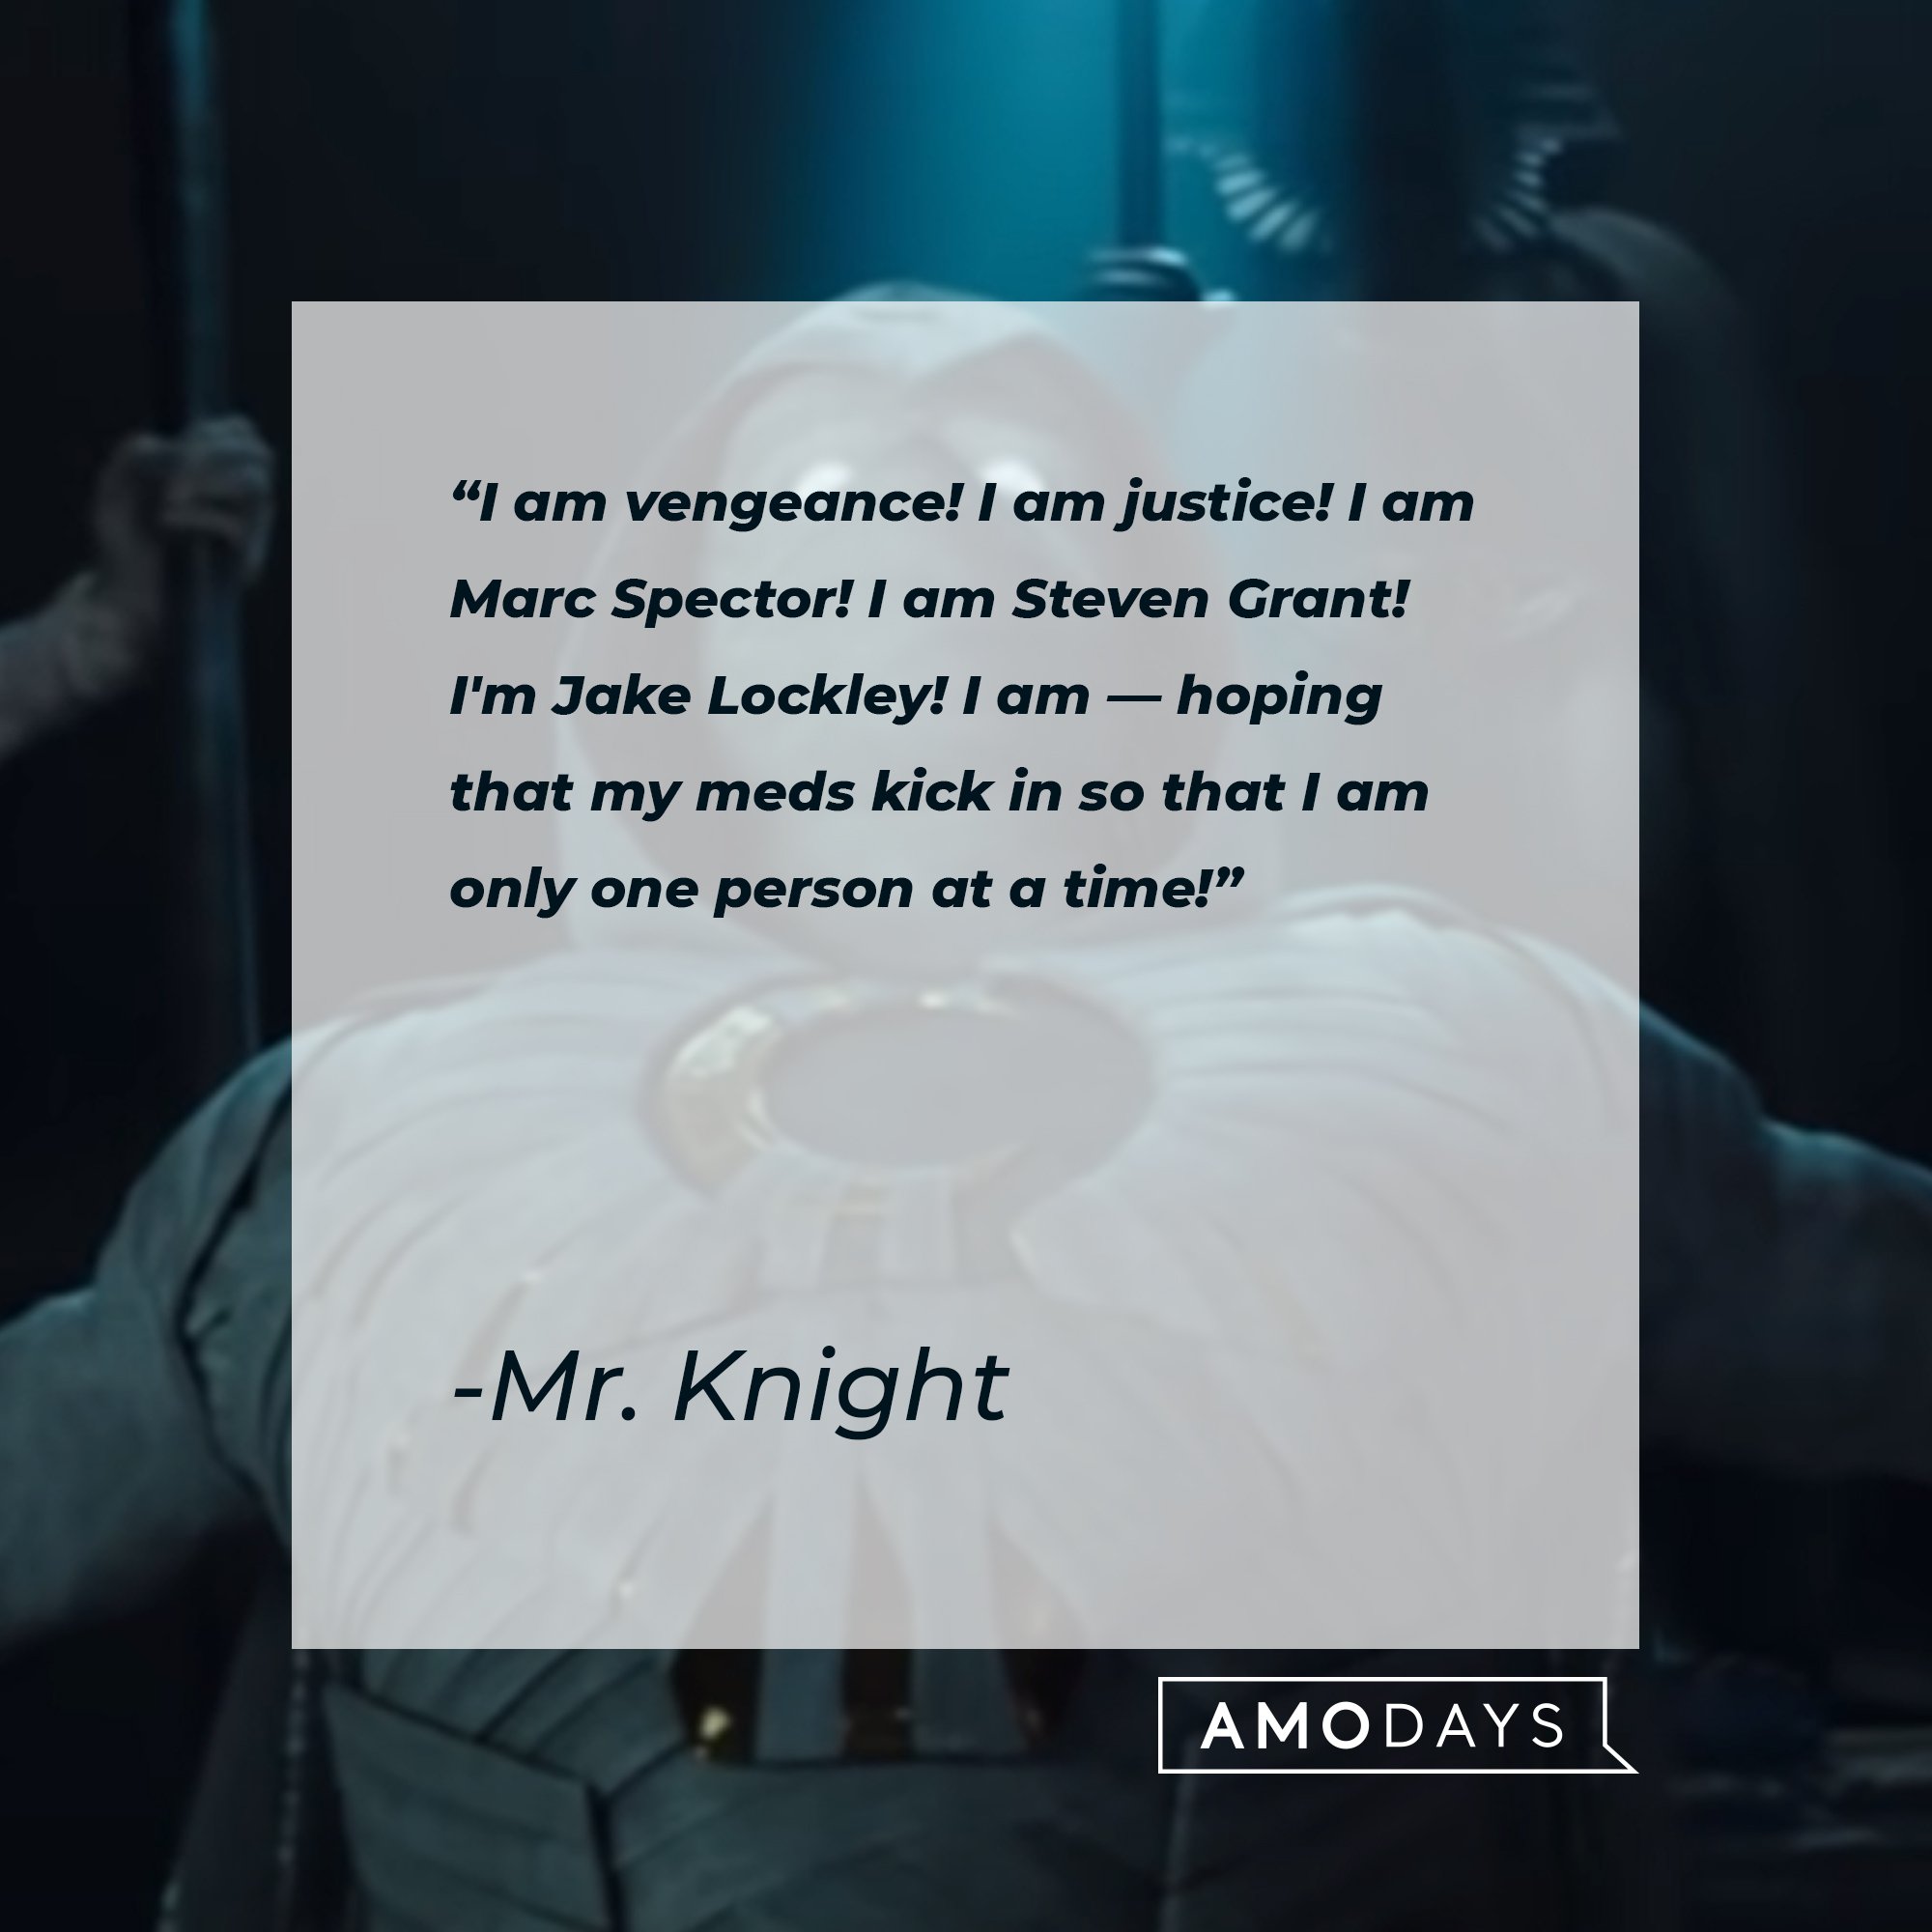 Mr. Knight’a quote: "I am vengeance! I am justice! I am Marc Spector! I am Steven Grant! I'm Jake Lockley! I am — hoping that my meds kick in so that I am only one person at a time!" | Image: AmoDays